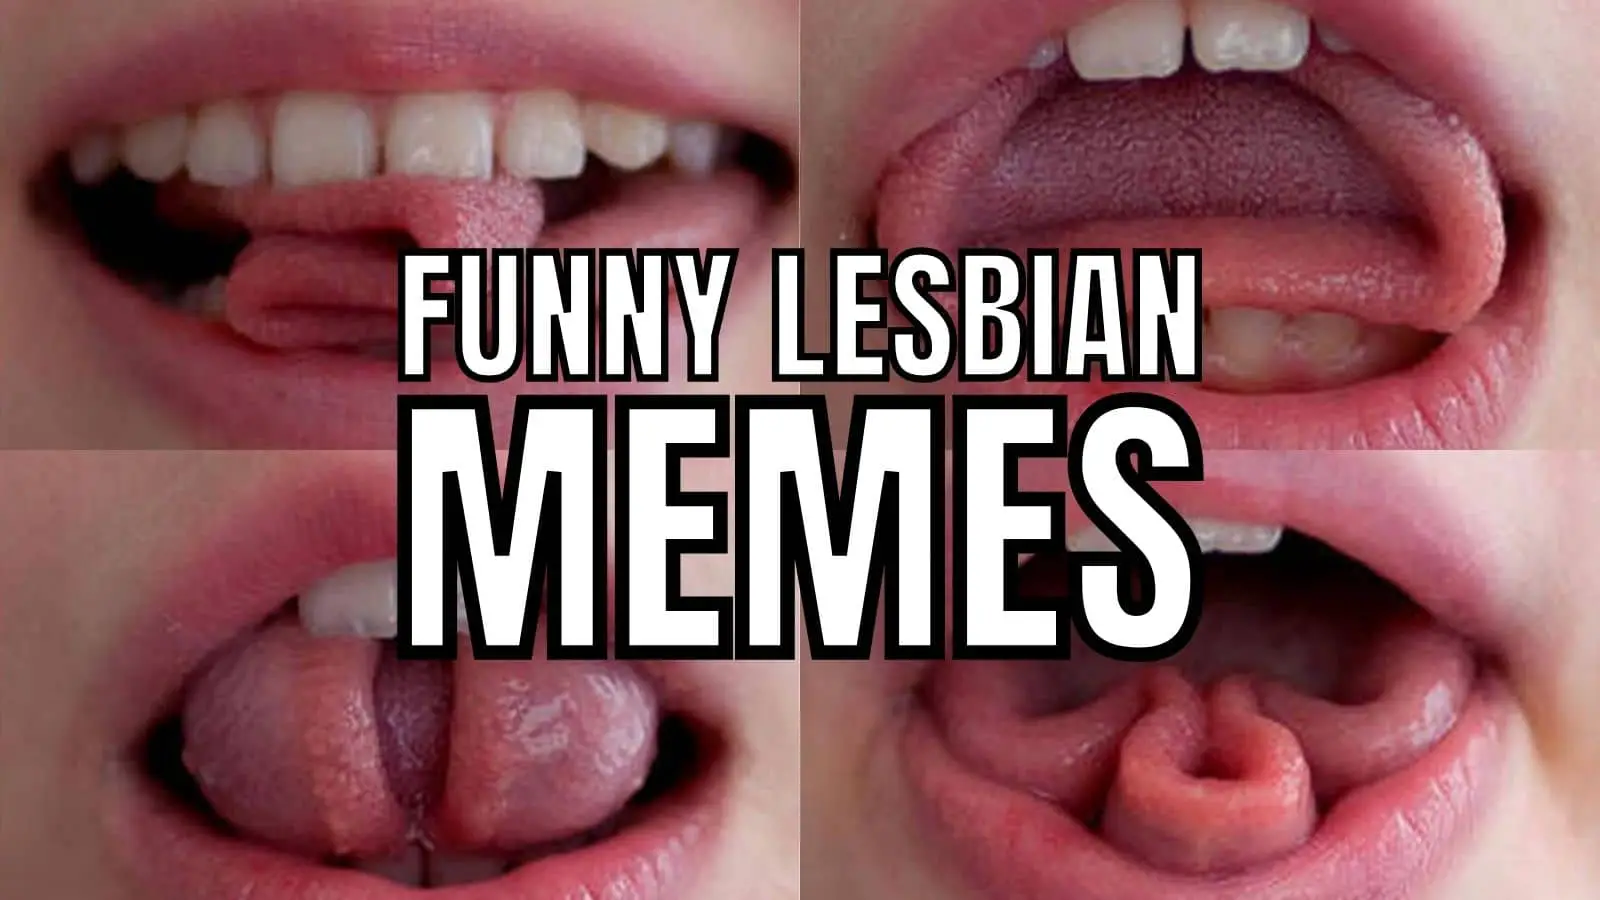 Bisexual Sex Memes - 25 Lesbian Memes That Will Have You Gasping - HumorNama